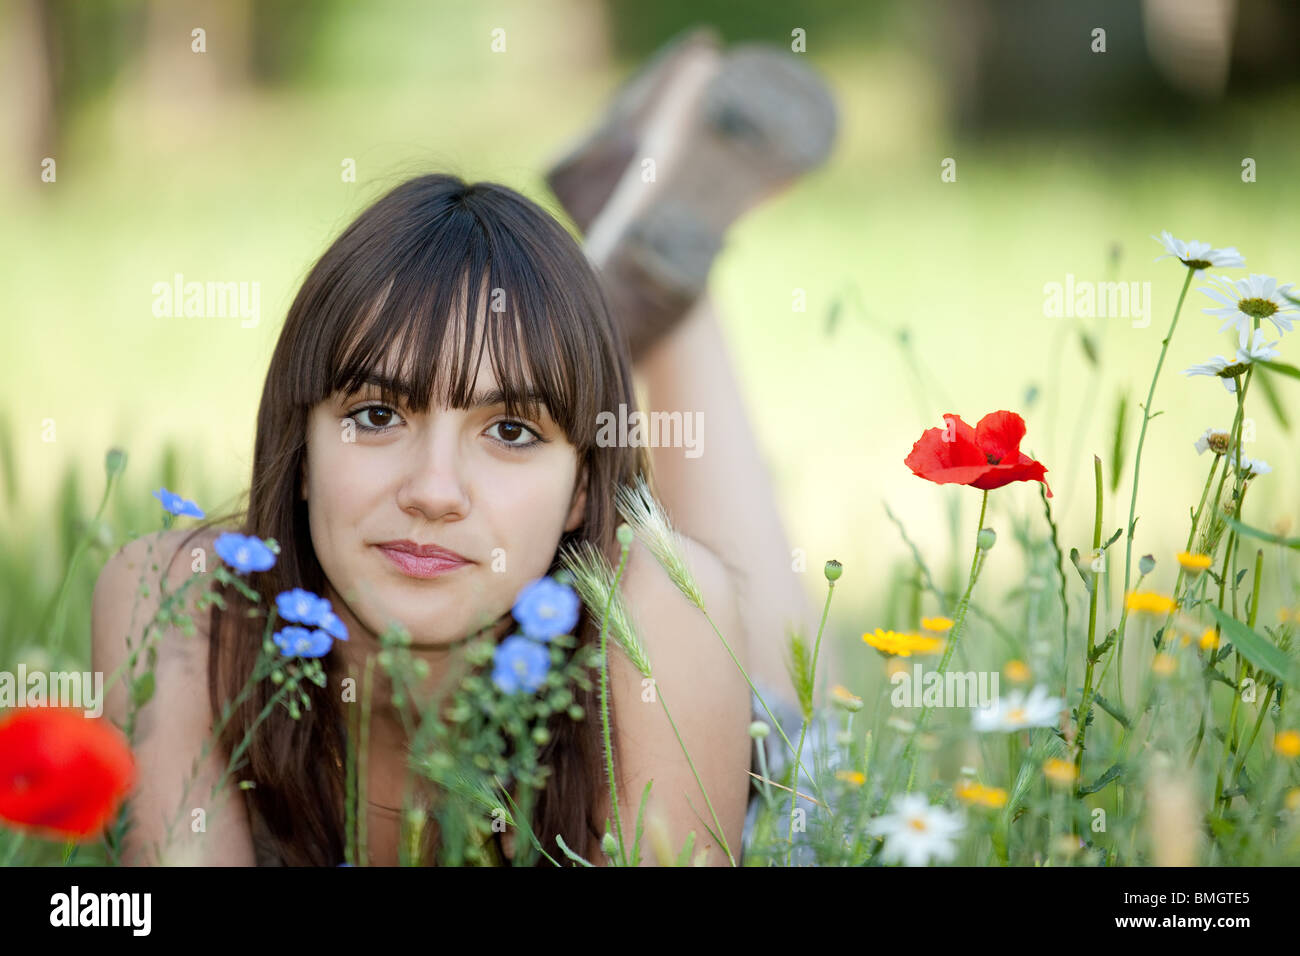 Teen girl lying in wild flowers bed looking at camera Banque D'Images